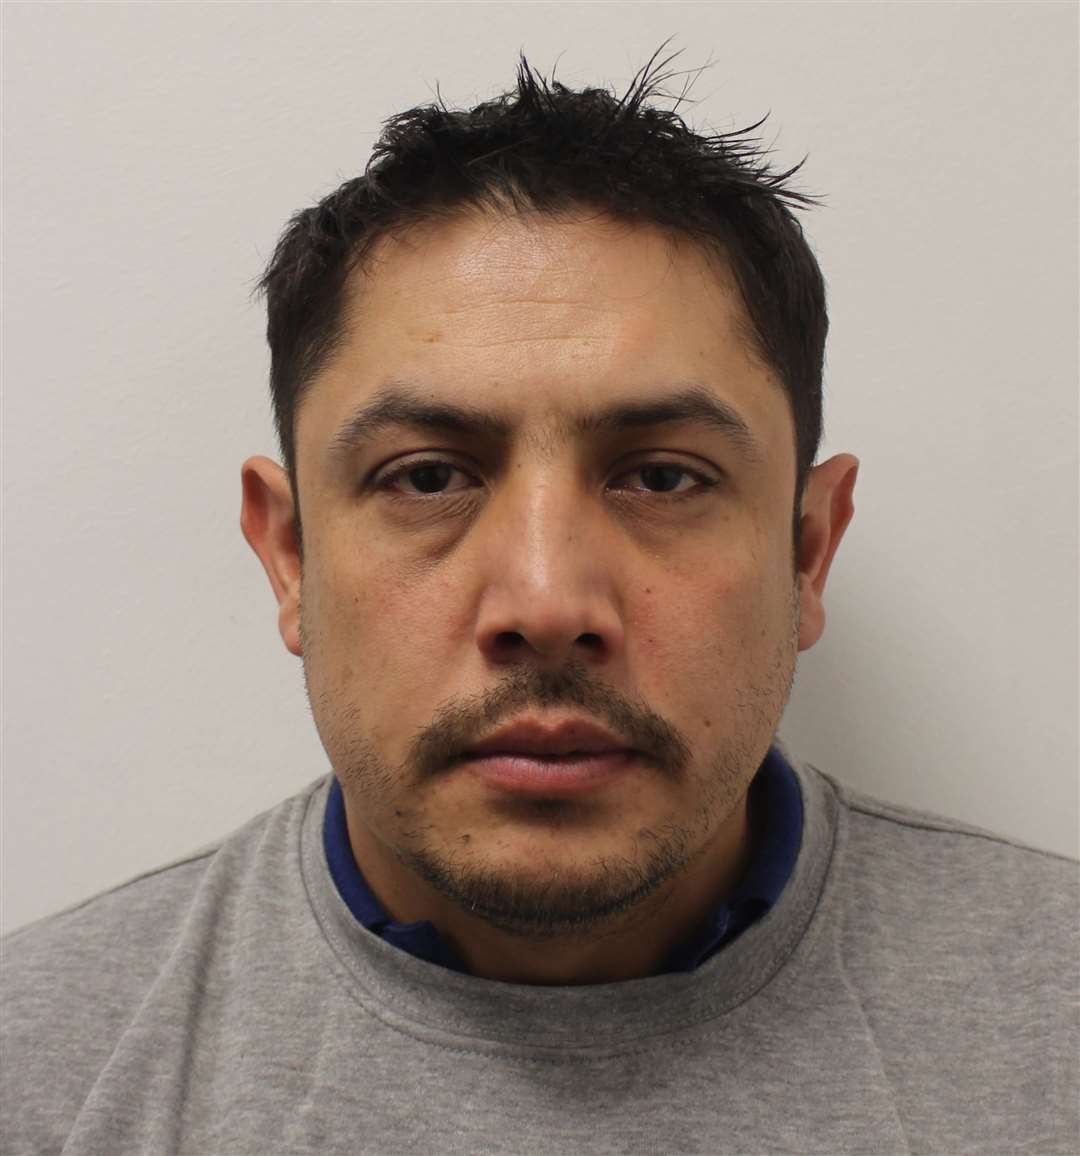 Carlos Lane, 38, was handed a four-year term for his part in the scheme. Photo: Metropolitan Police